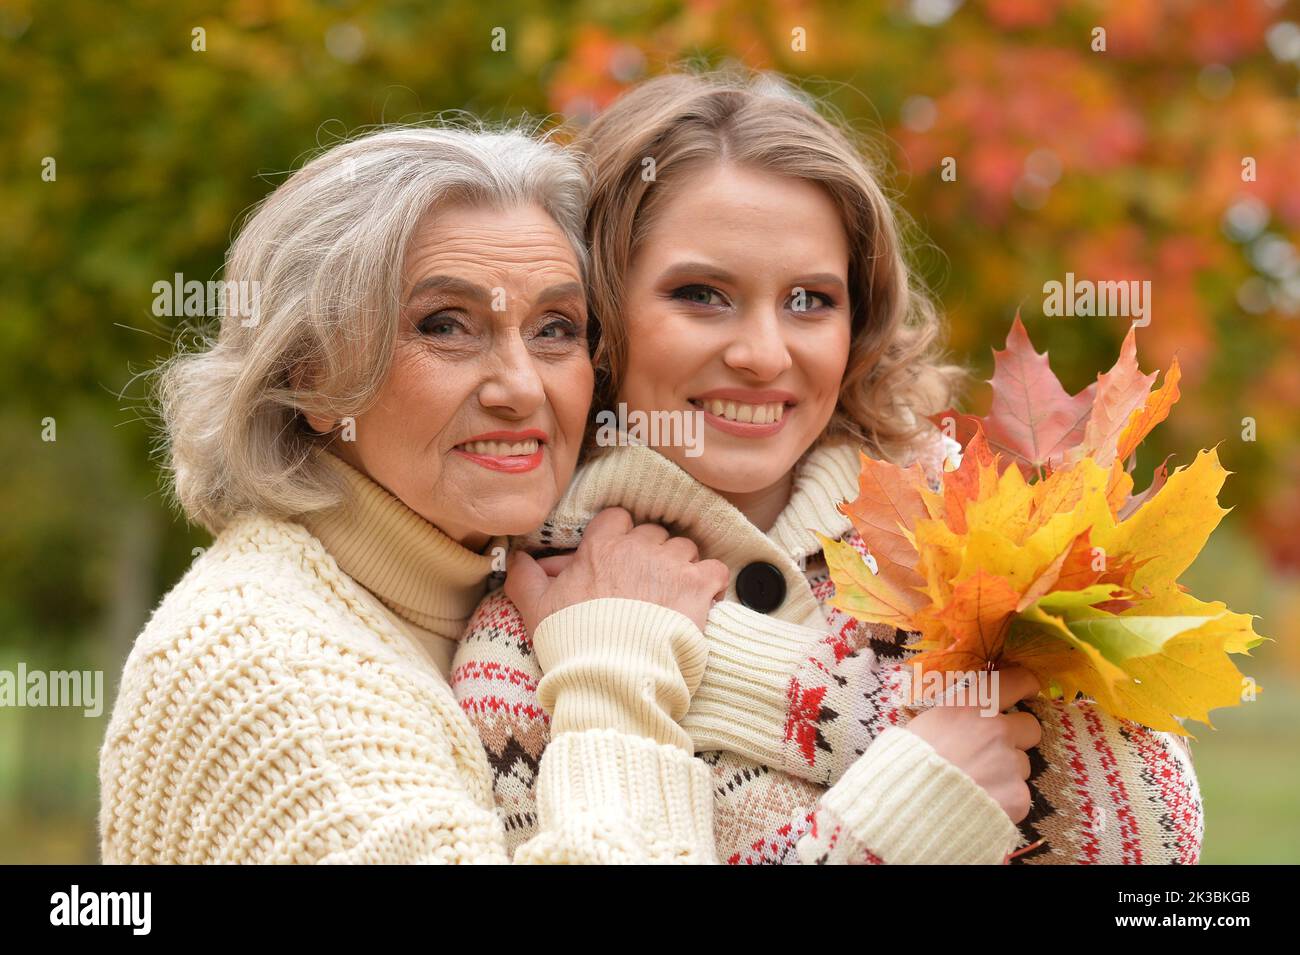 Portrait of an elderly woman with her daughter in the park in autumn. Stock Photo